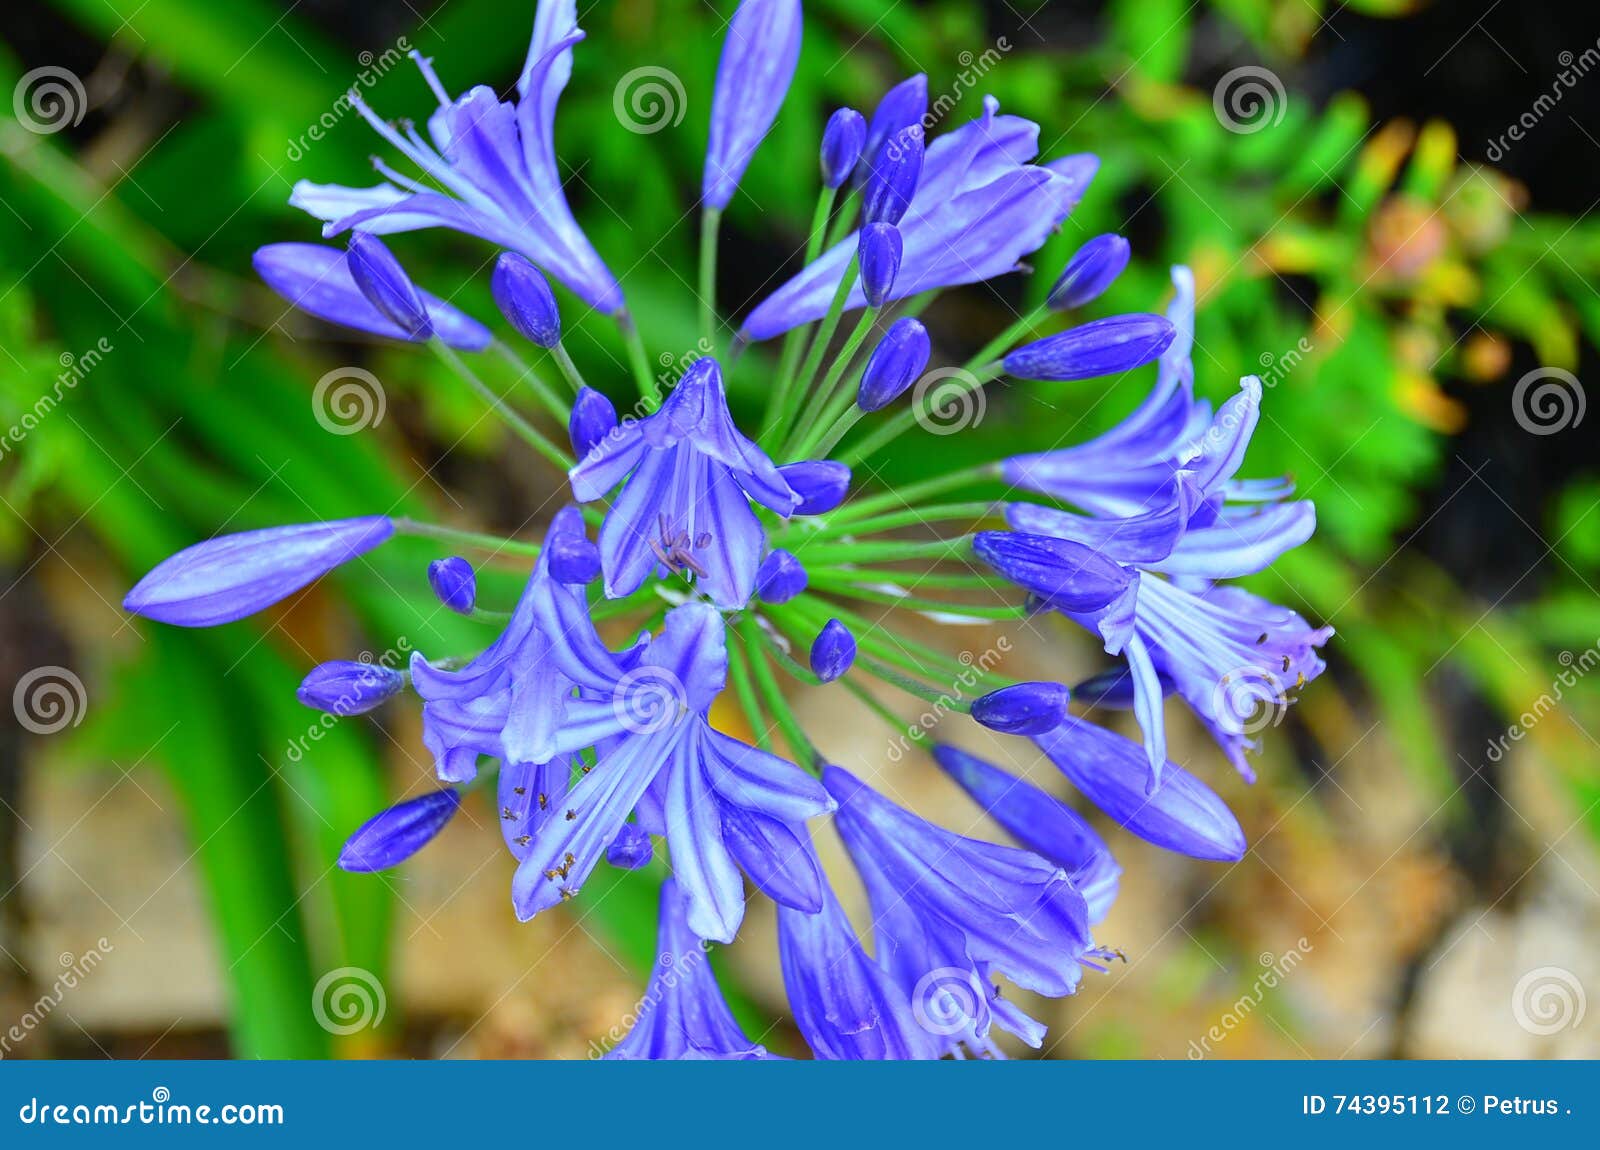 incredible blue agapanthus flower in new zealand garden stock photo